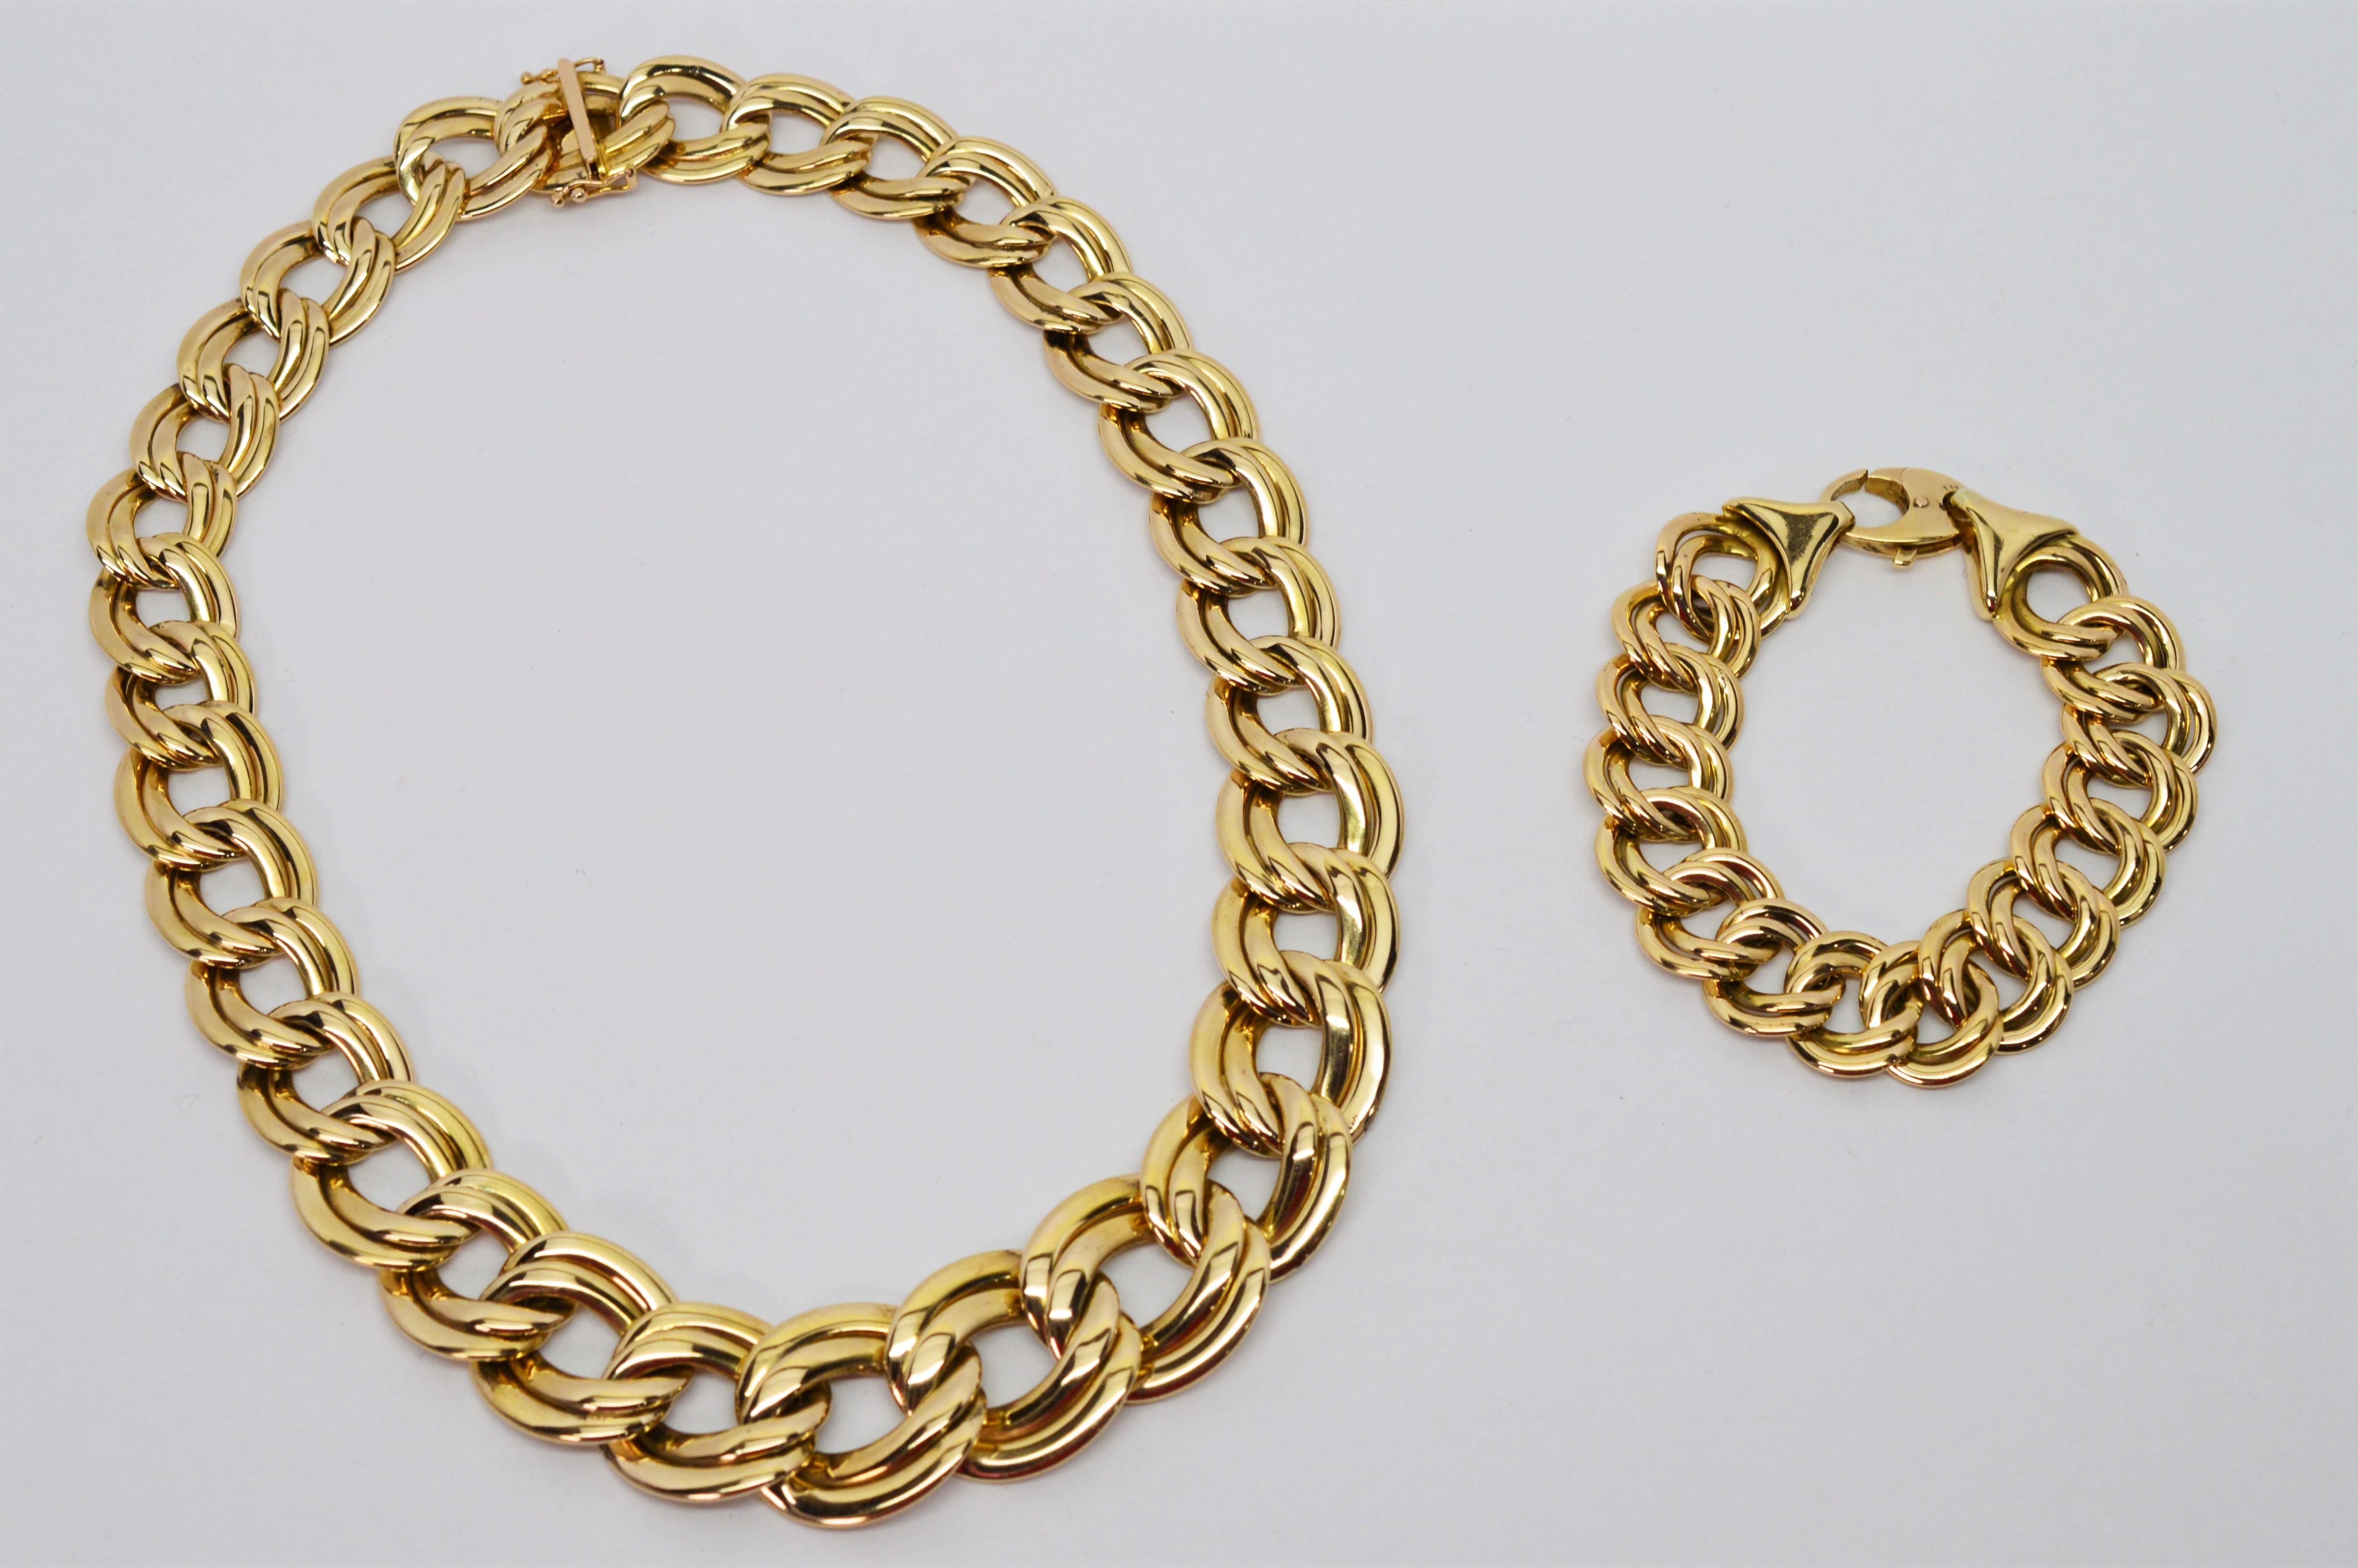 With substantial presence, this double link chain necklace in a 17 inch length and matching 6-3/4 inch  bracelet make a bold and stylish statement.
Italian made in fourteen carat 14K yellow gold, the interlocking chain links, approximately 5/8 inch